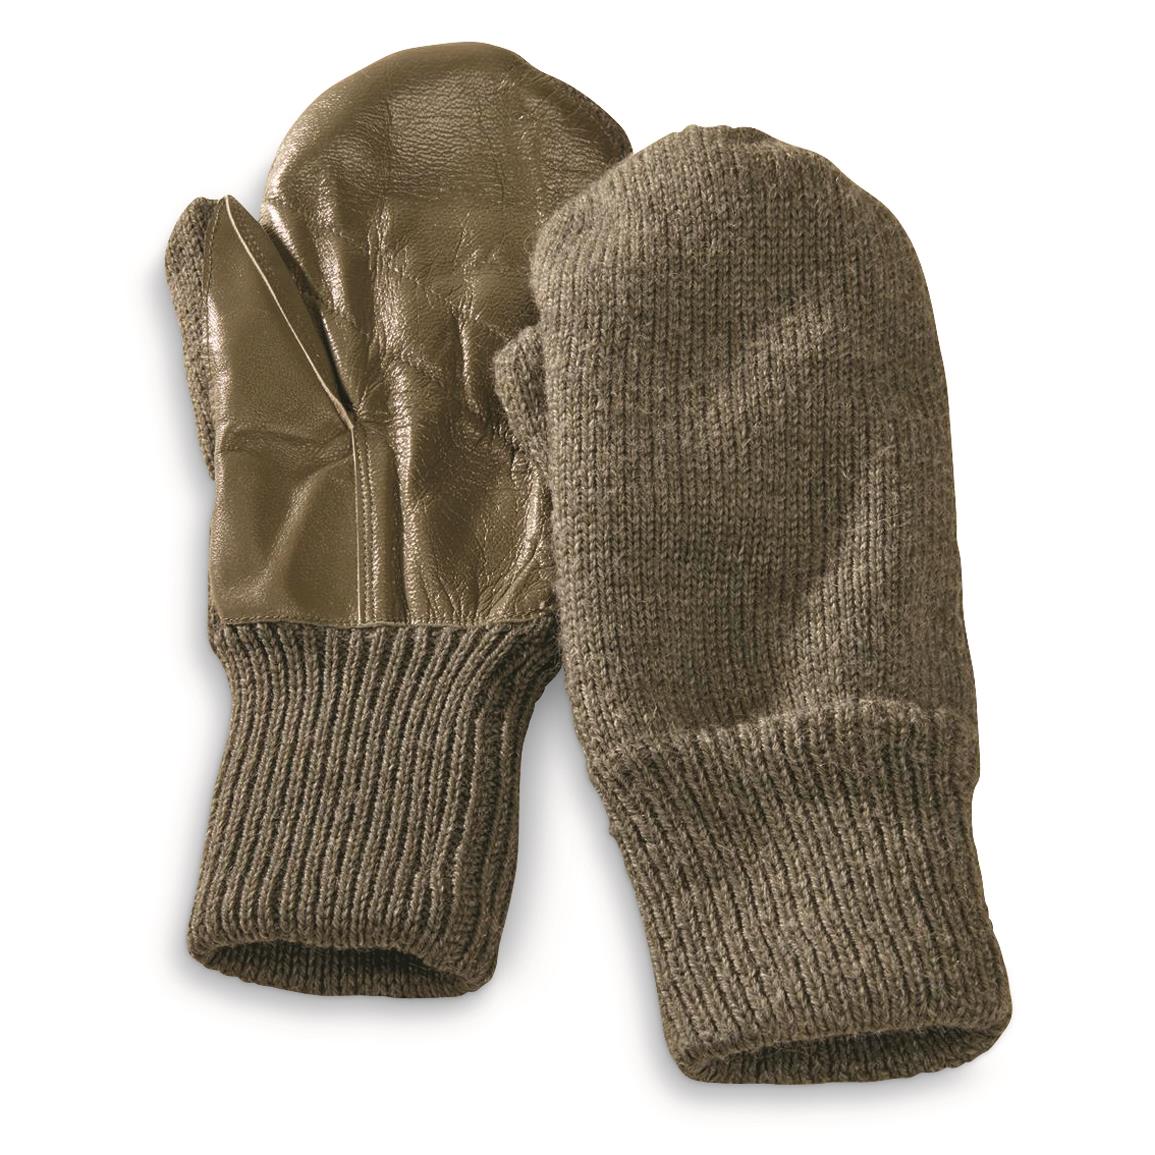 Swiss Military Surplus Wool Mitten Liners, 2 Pack Used, Olive Drab